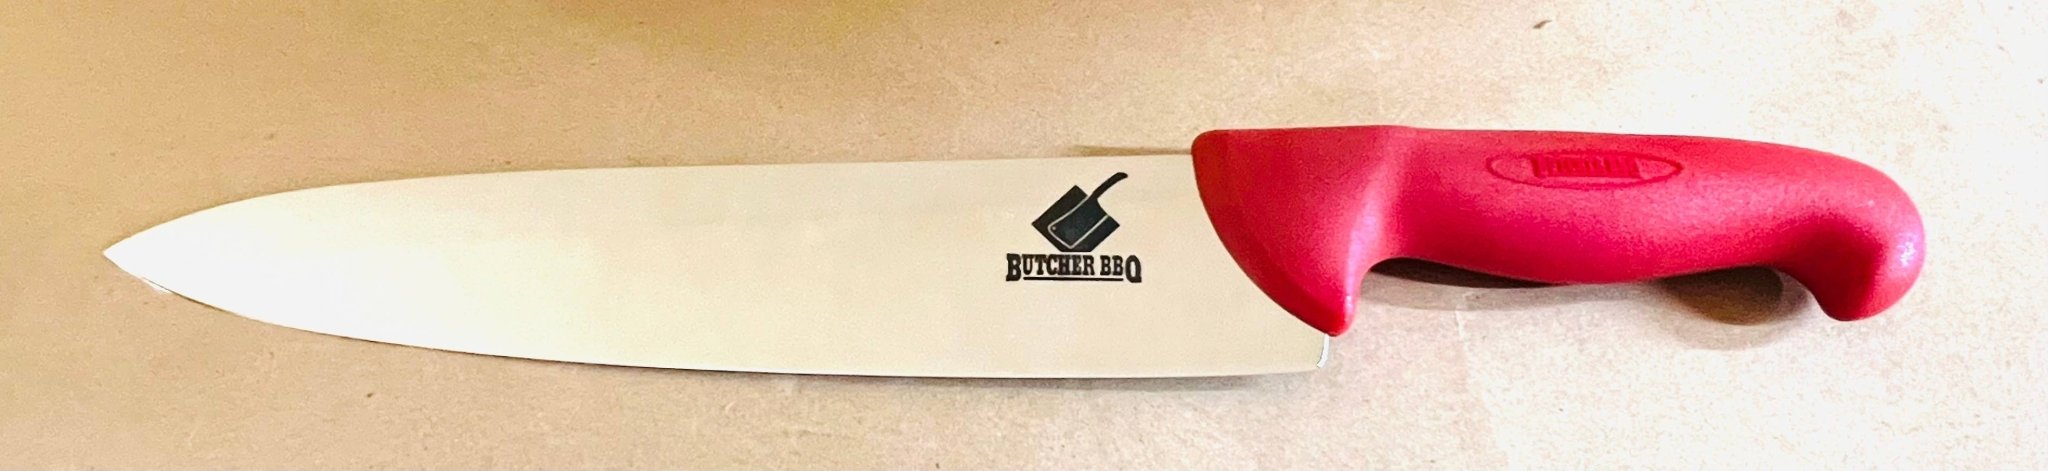 Butcher BBQ Inc - Professional 10 inch Chef Knife - Pacific Flyway Supplies